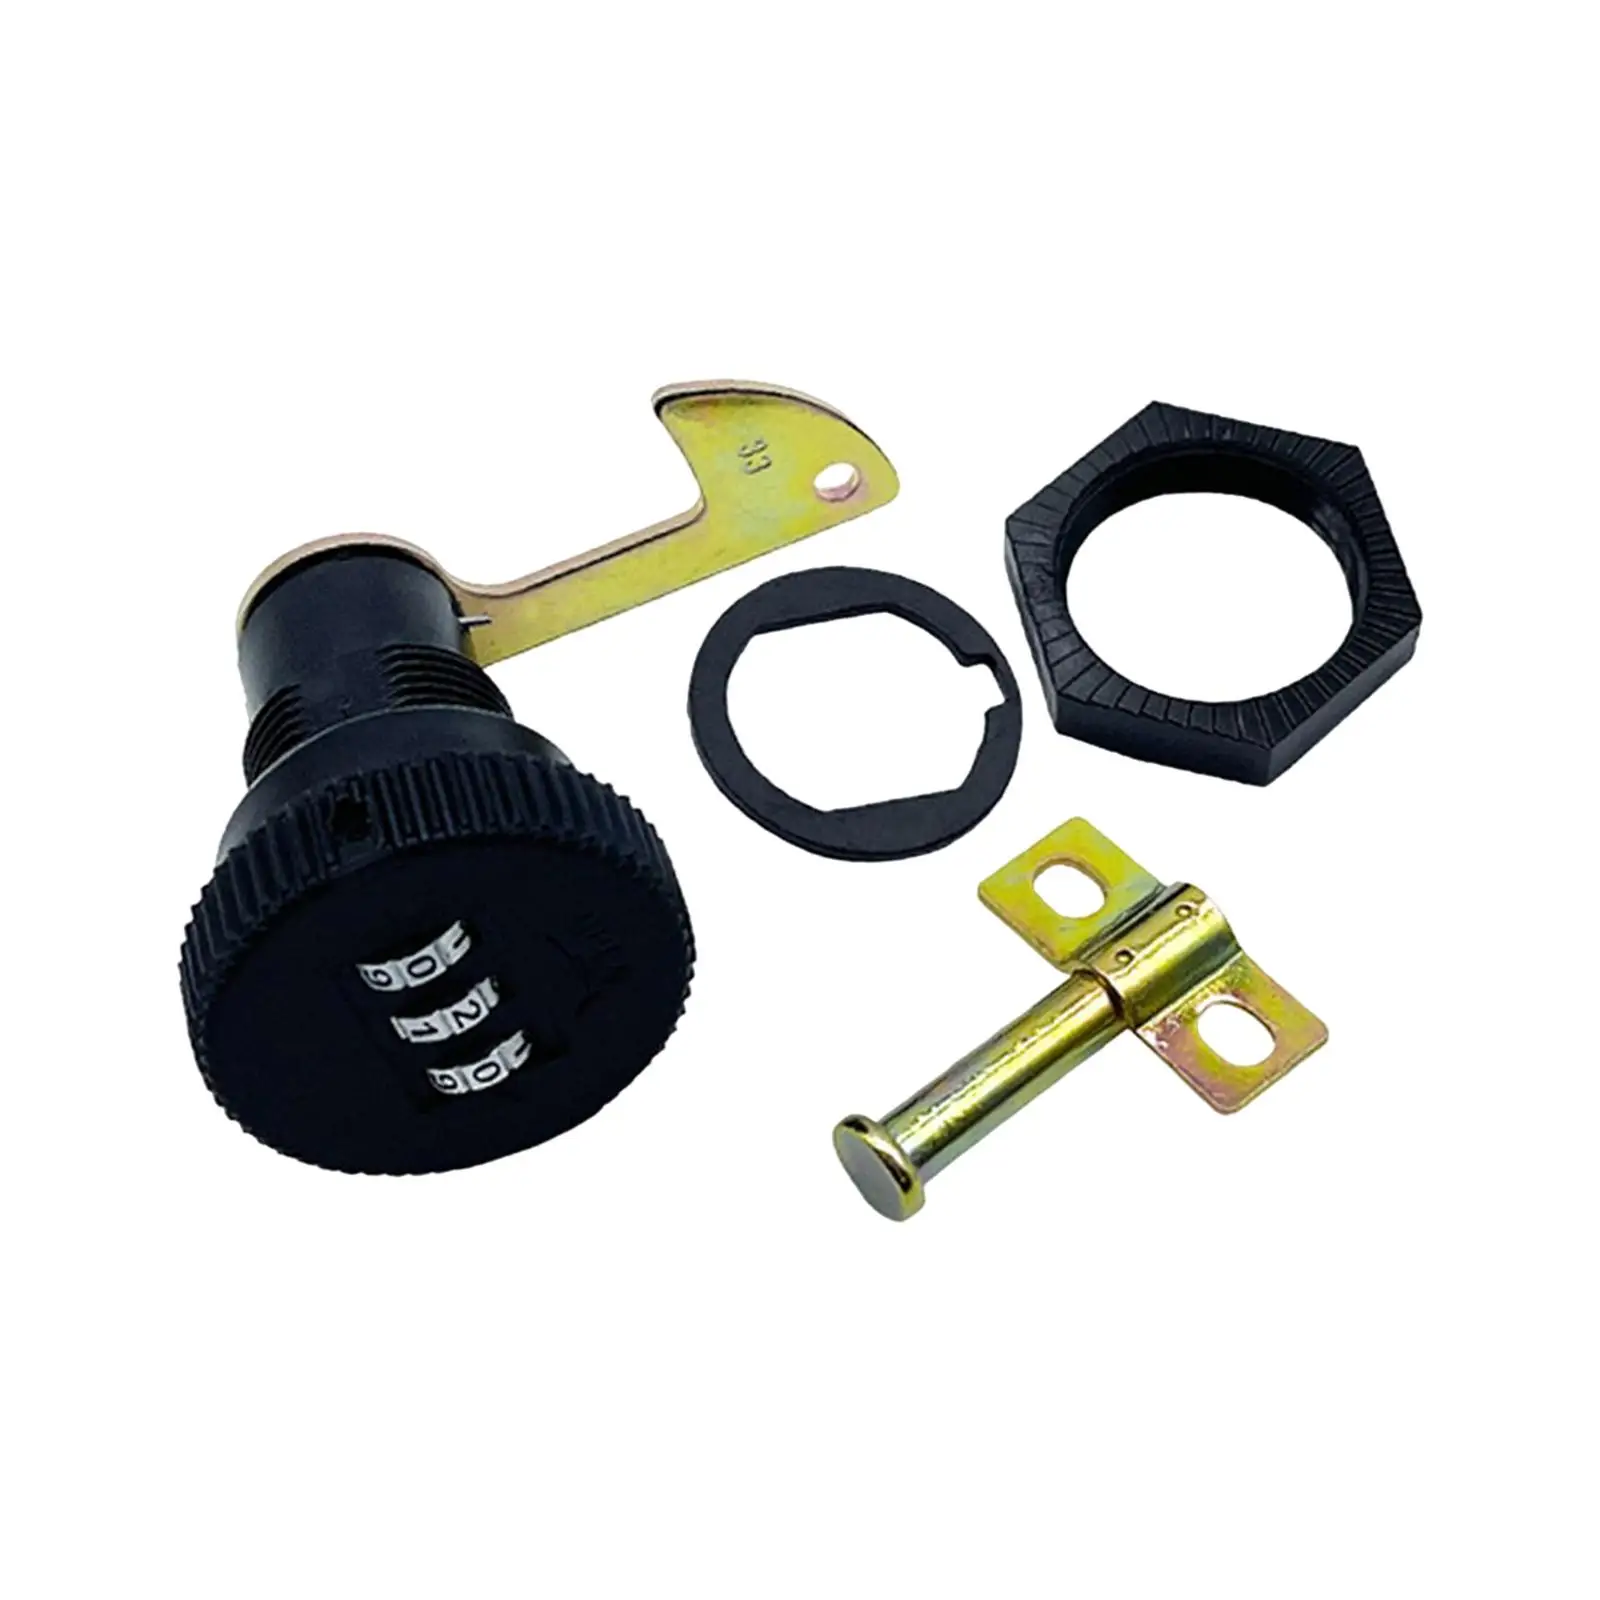 Combination Lock for Motorbike Rear Trunk Easily Install Accessory Replaces